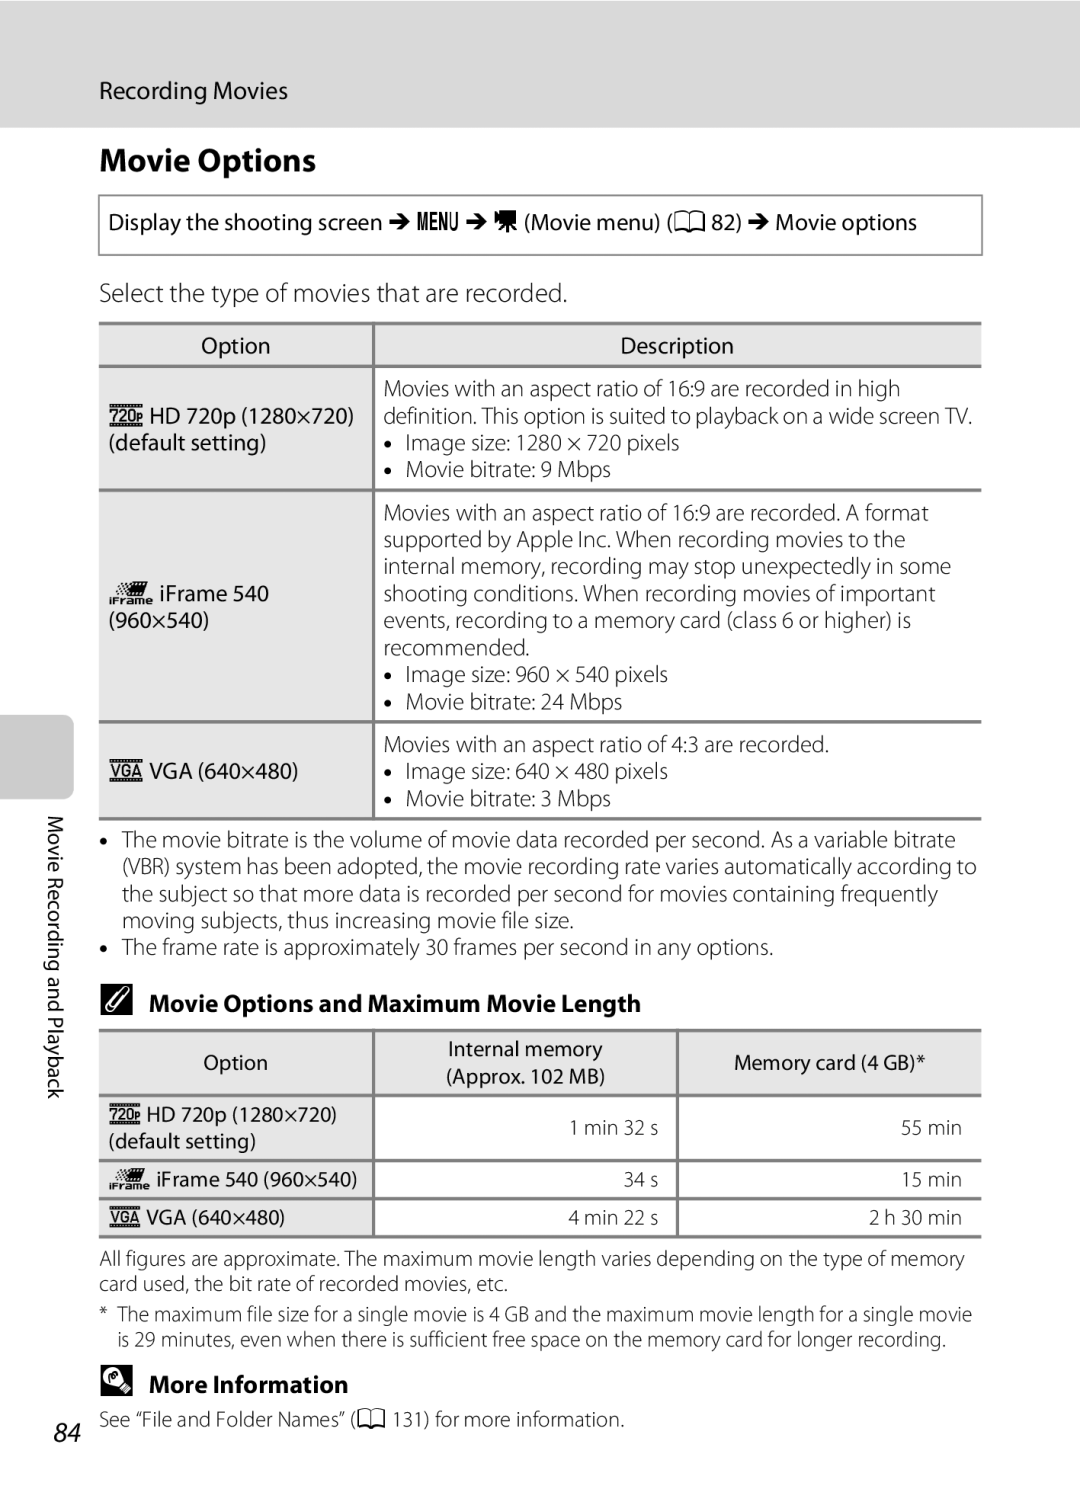 Nikon COOLPIXL120BLK user manual Select the type of movies that are recorded, Movie Options and Maximum Movie Length 